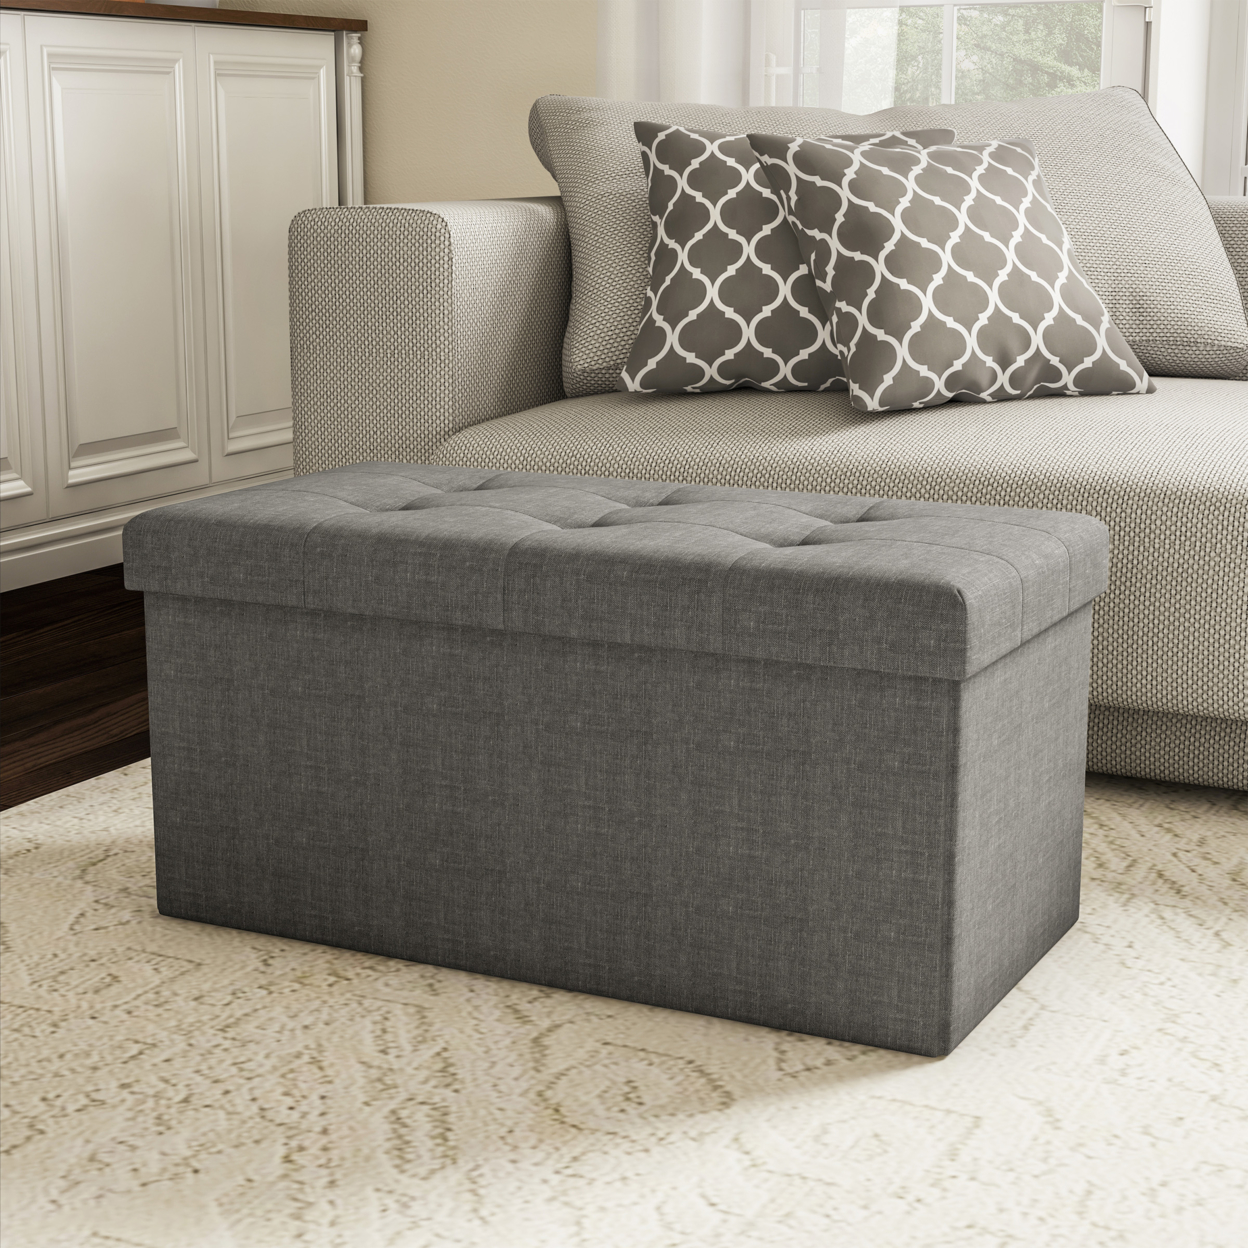 Large Folding Gray Foot Stool Storage Ottoman Bench And Lid 30 X 15 X 15 For Seat Or Feet